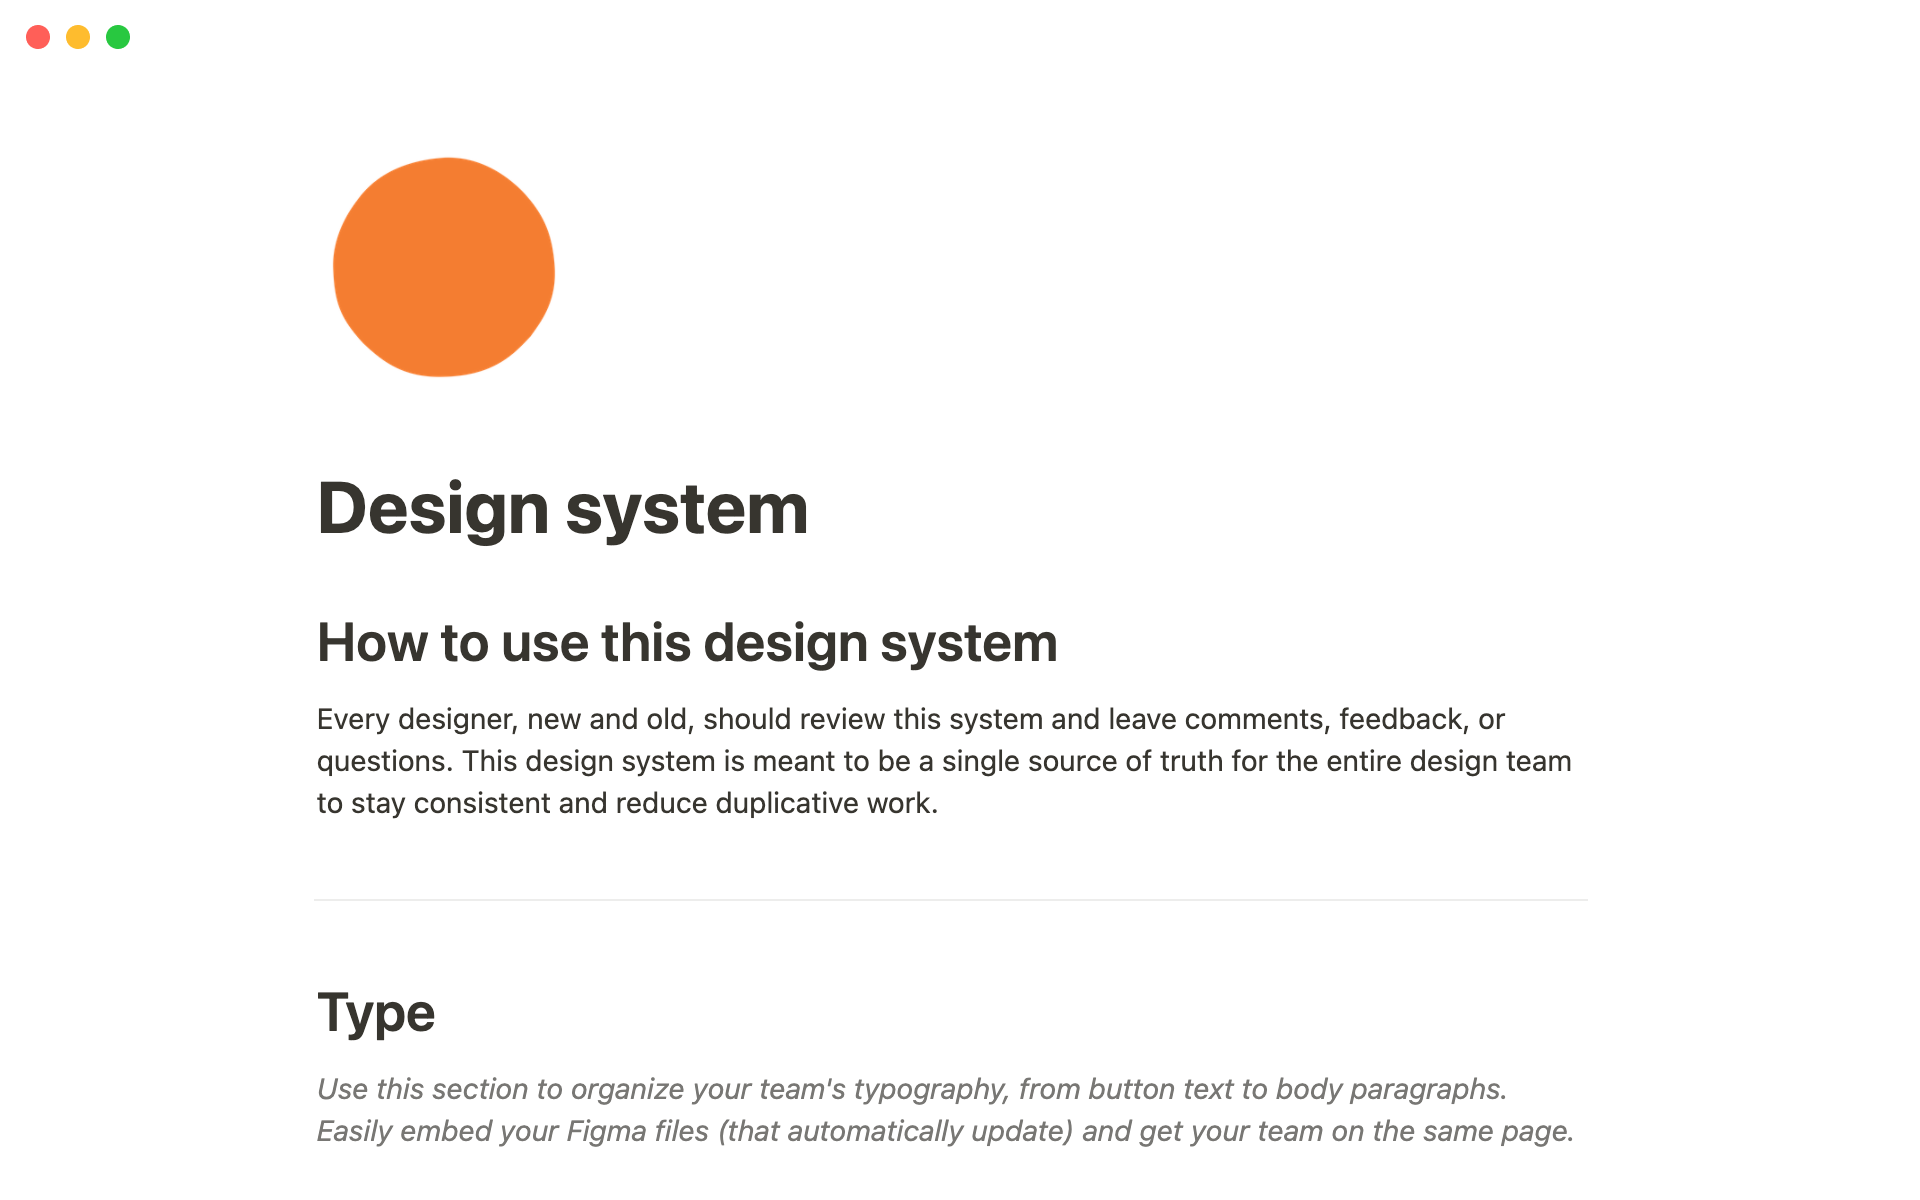 The desktop image for Headspace's design system template